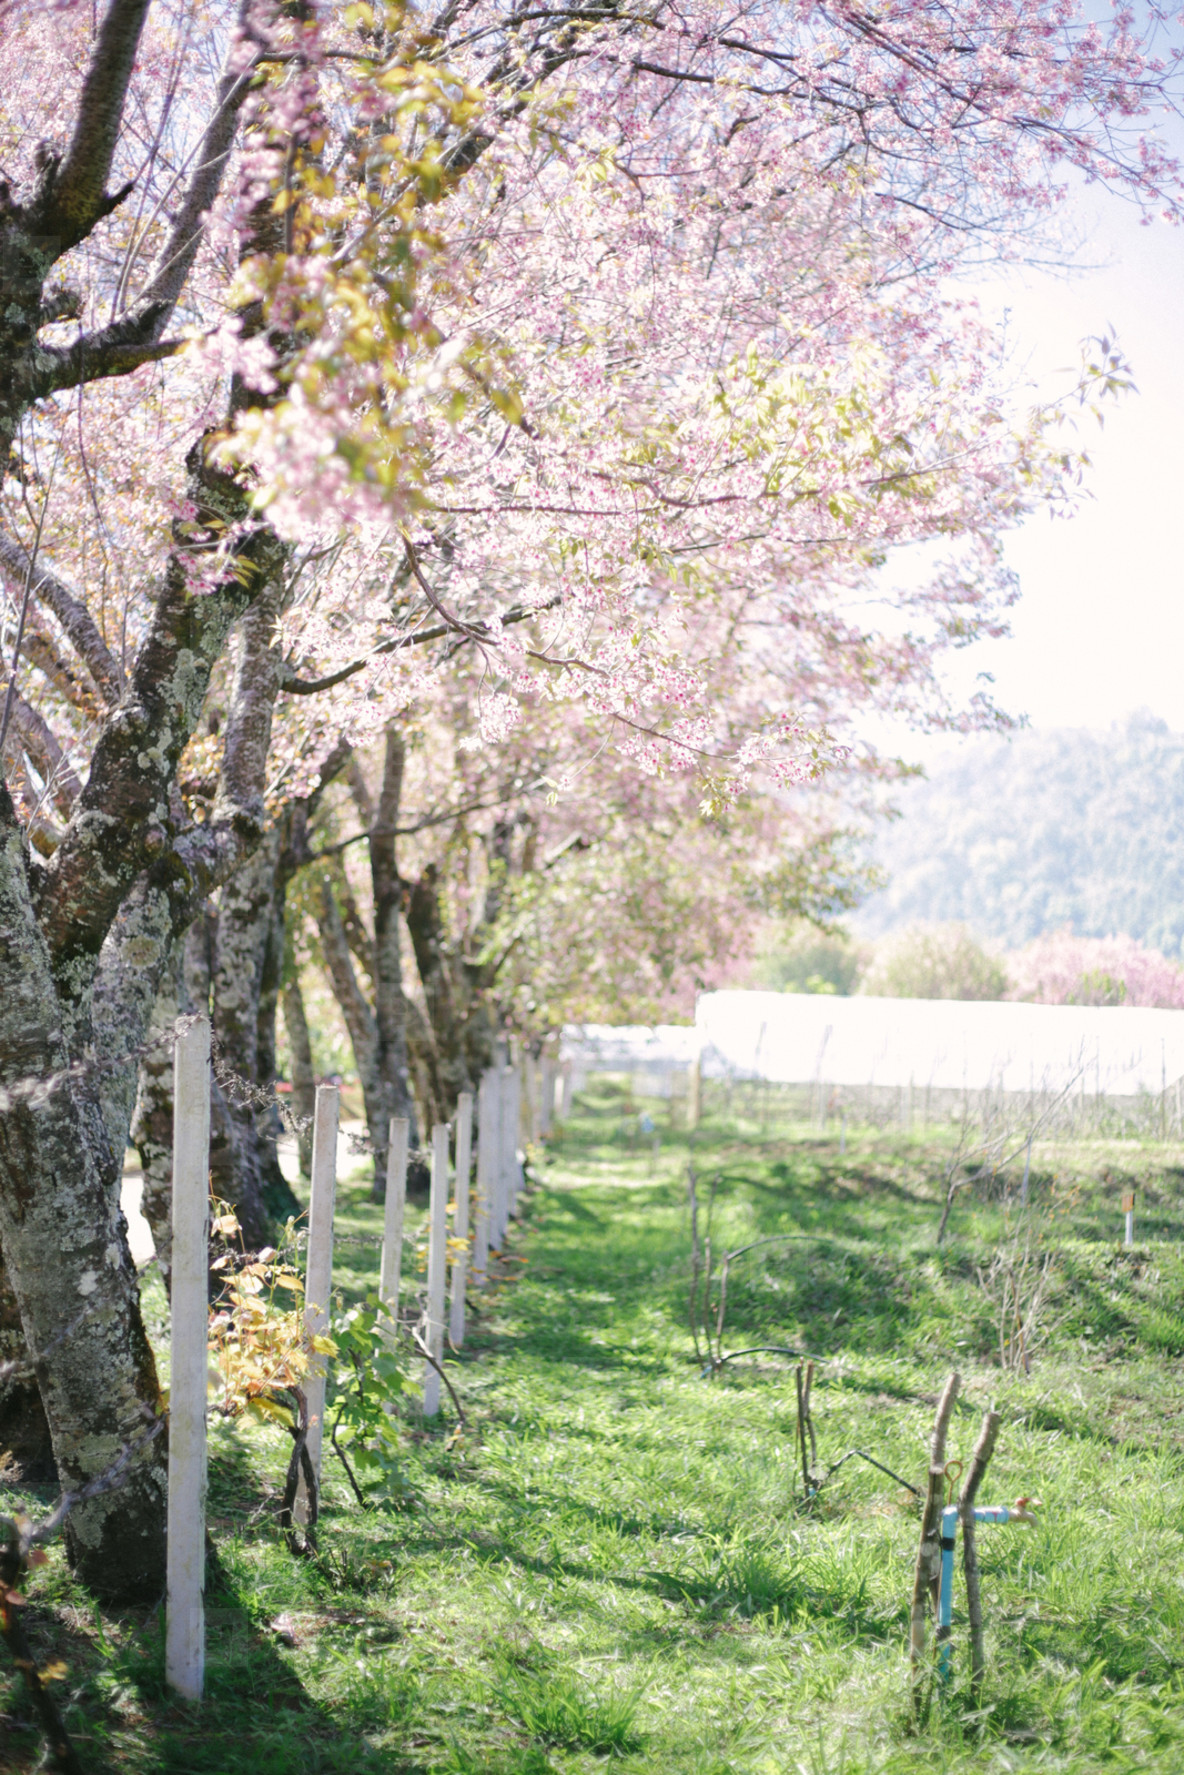 Photos - Rows of cherry blossom trees - YouWorkForThem